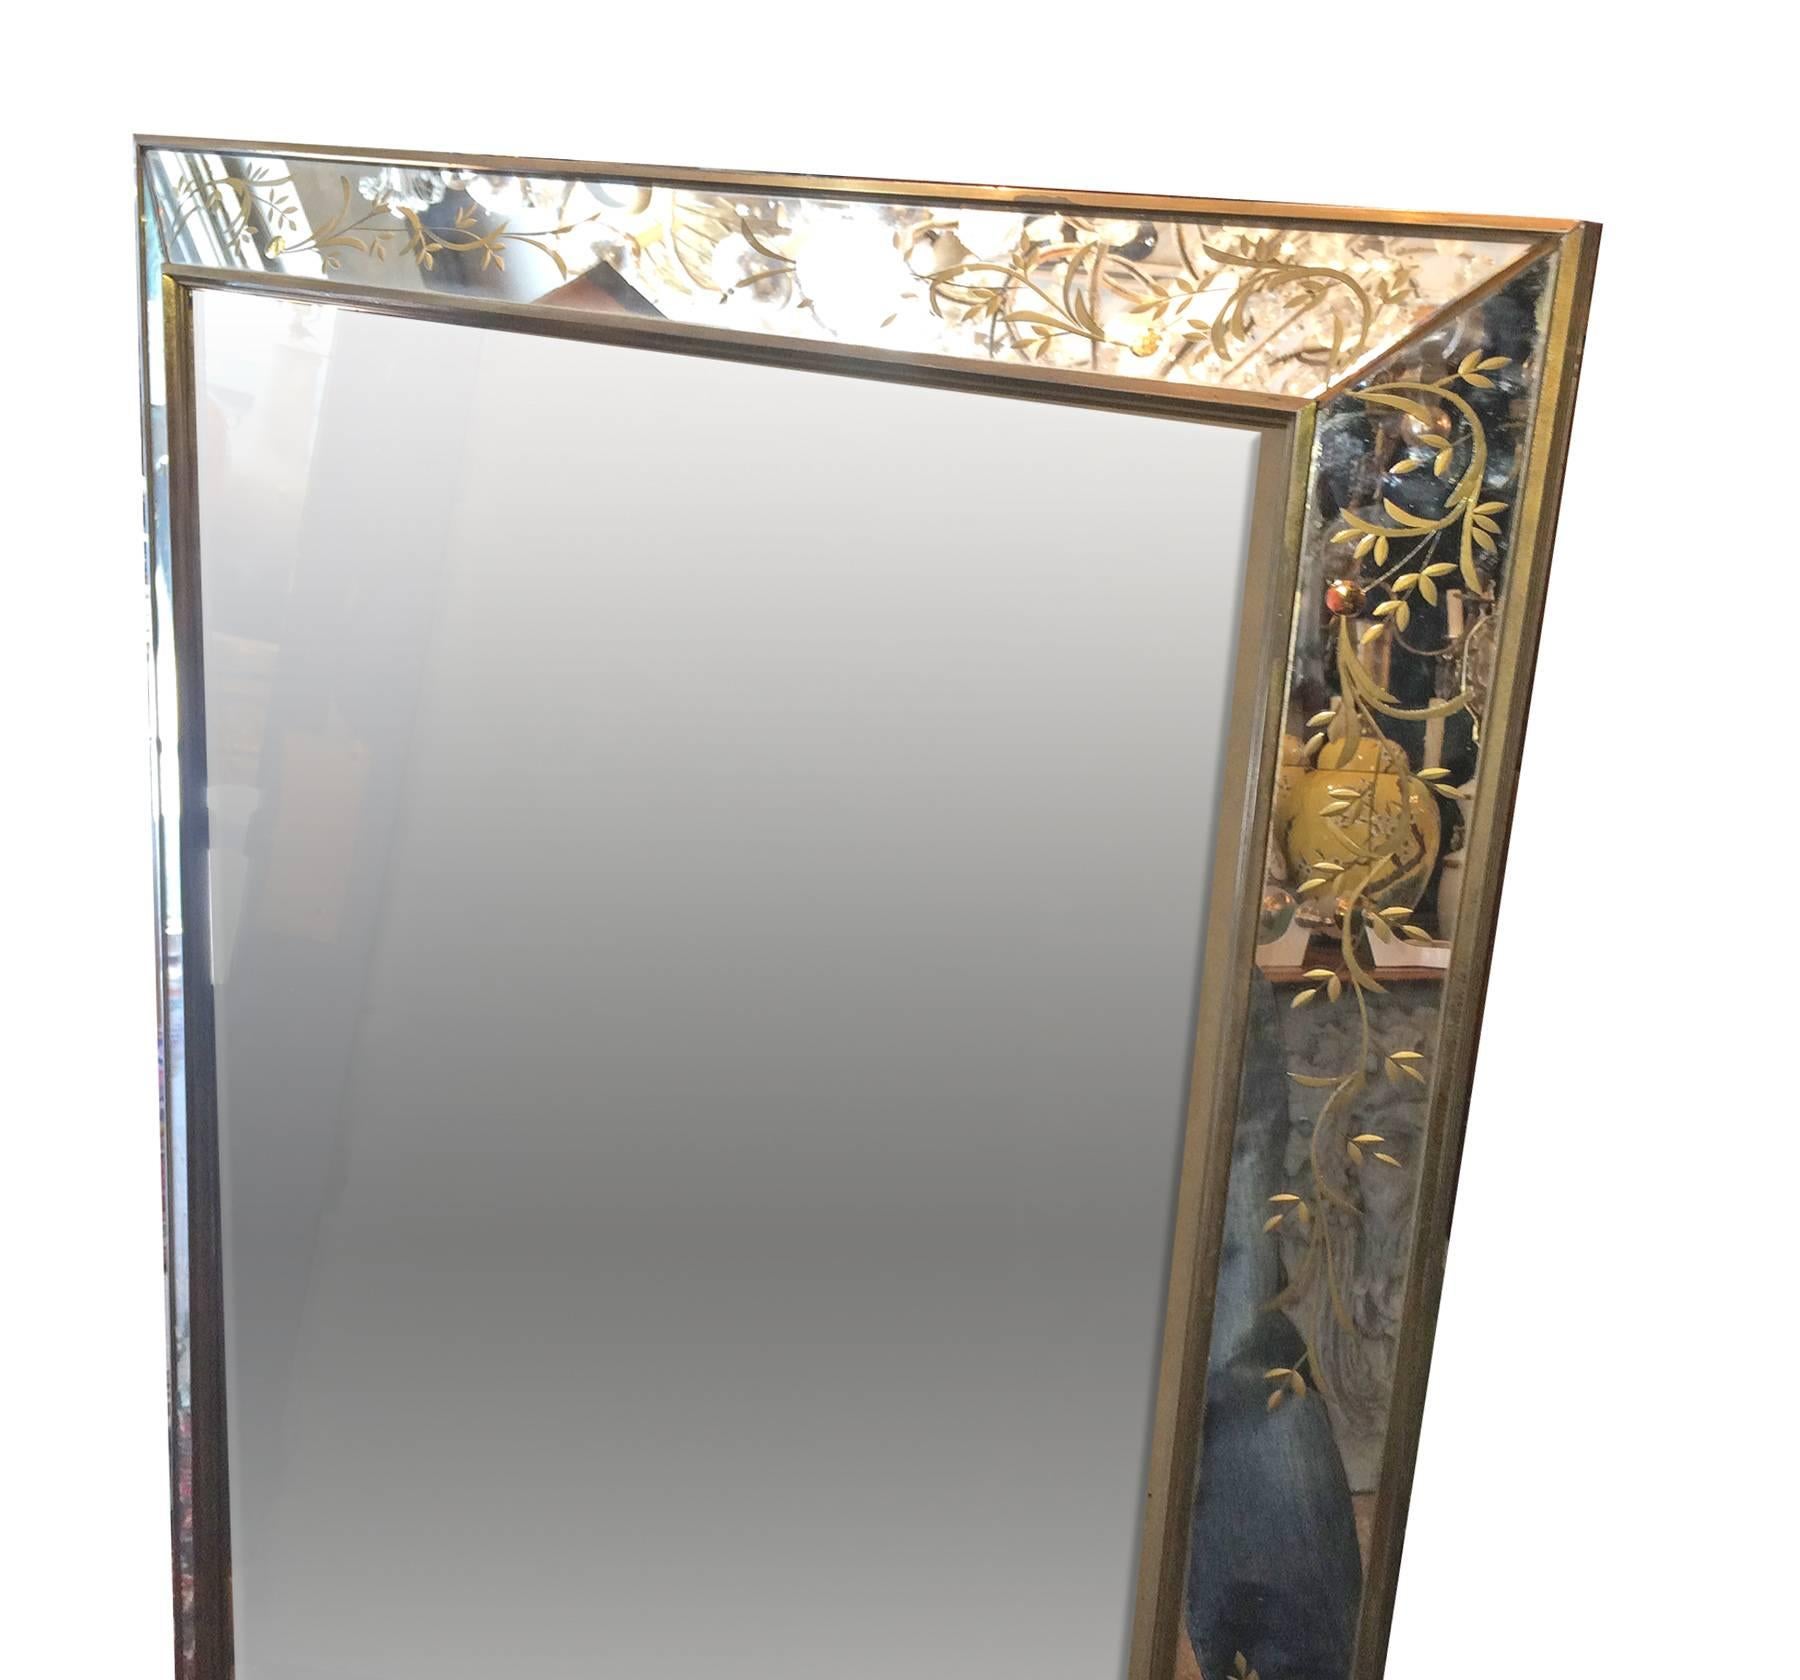 A French circa 1930's etched mirror with gilt details, floral and foliage decoration.

Measurements:
Height: 50